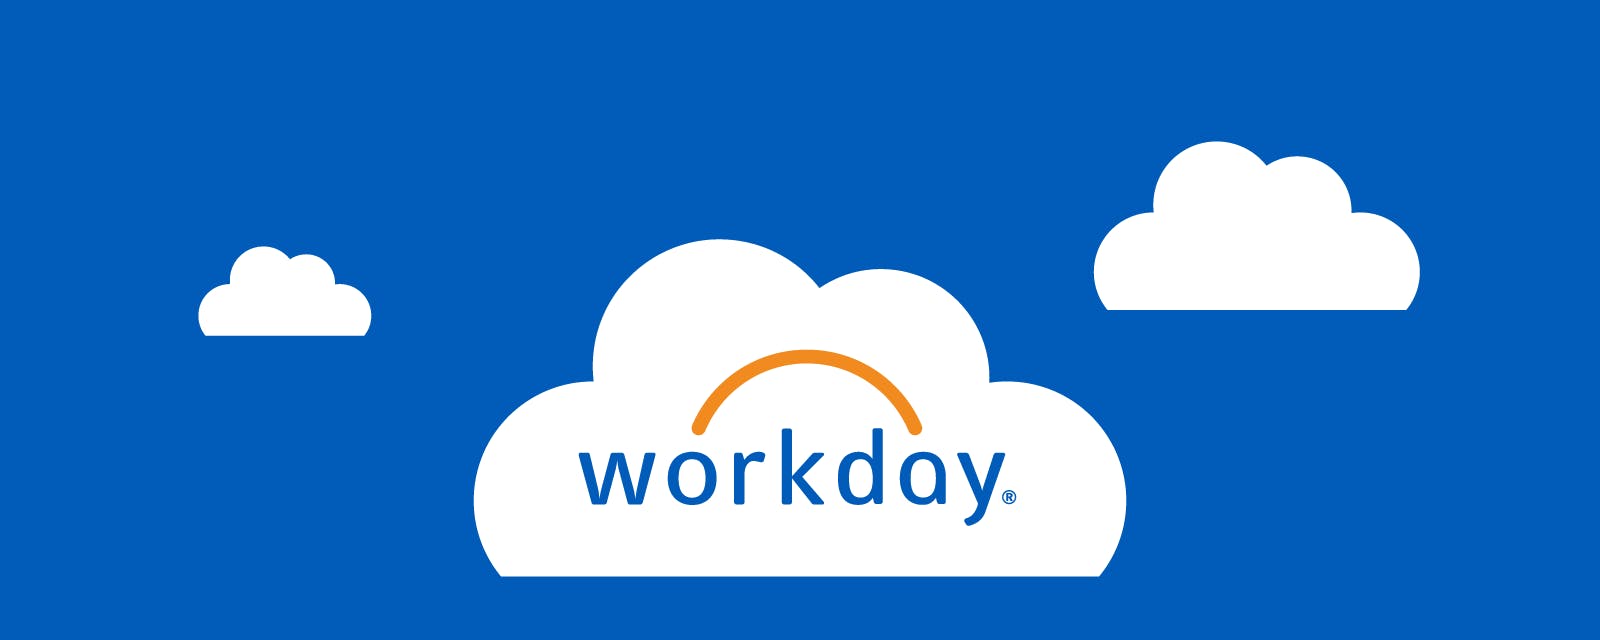 Workday 'Train the Trainer' Session 1: The Employee Experience Part 1 